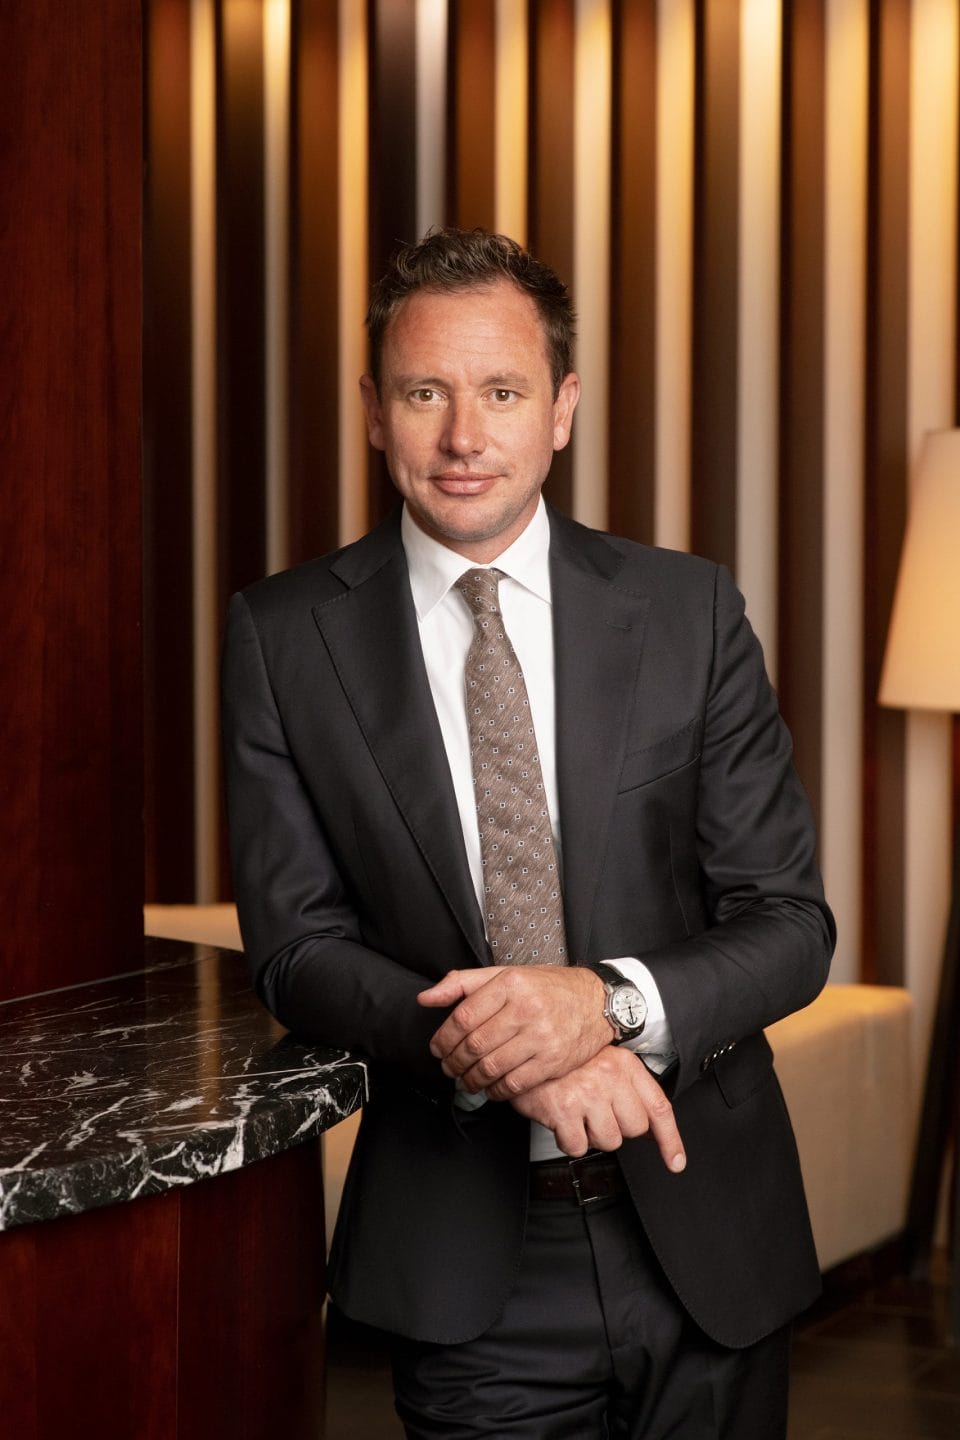 Frederique Constant CEO Niels Eggerding Gives Greater Insights Into the Brand